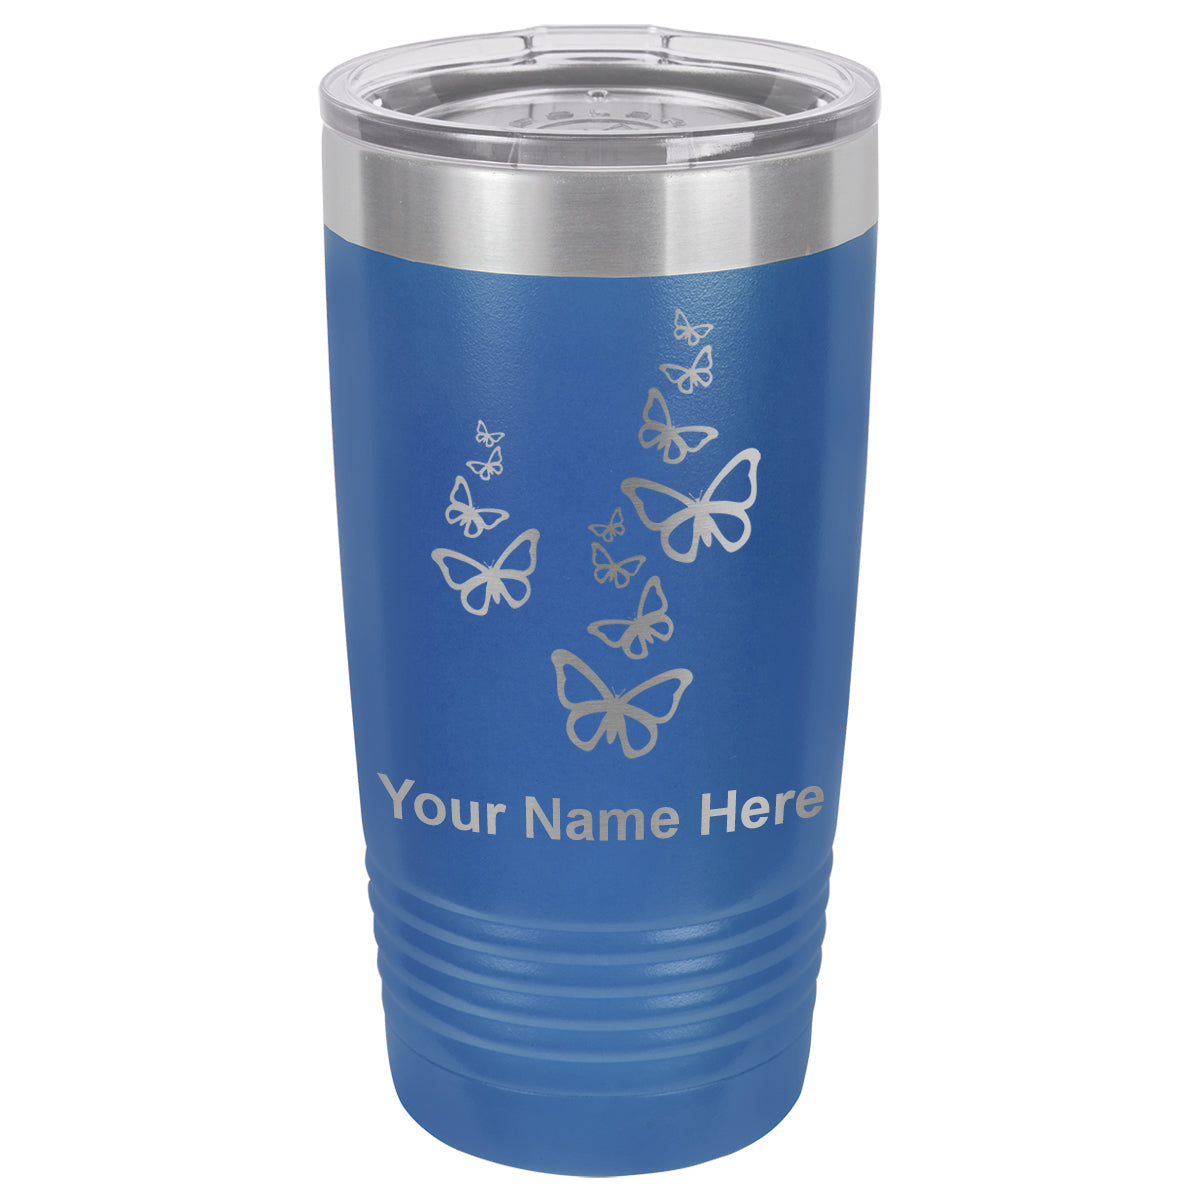 20oz Vacuum Insulated Tumbler Mug, Butterflies, Personalized Engraving Included